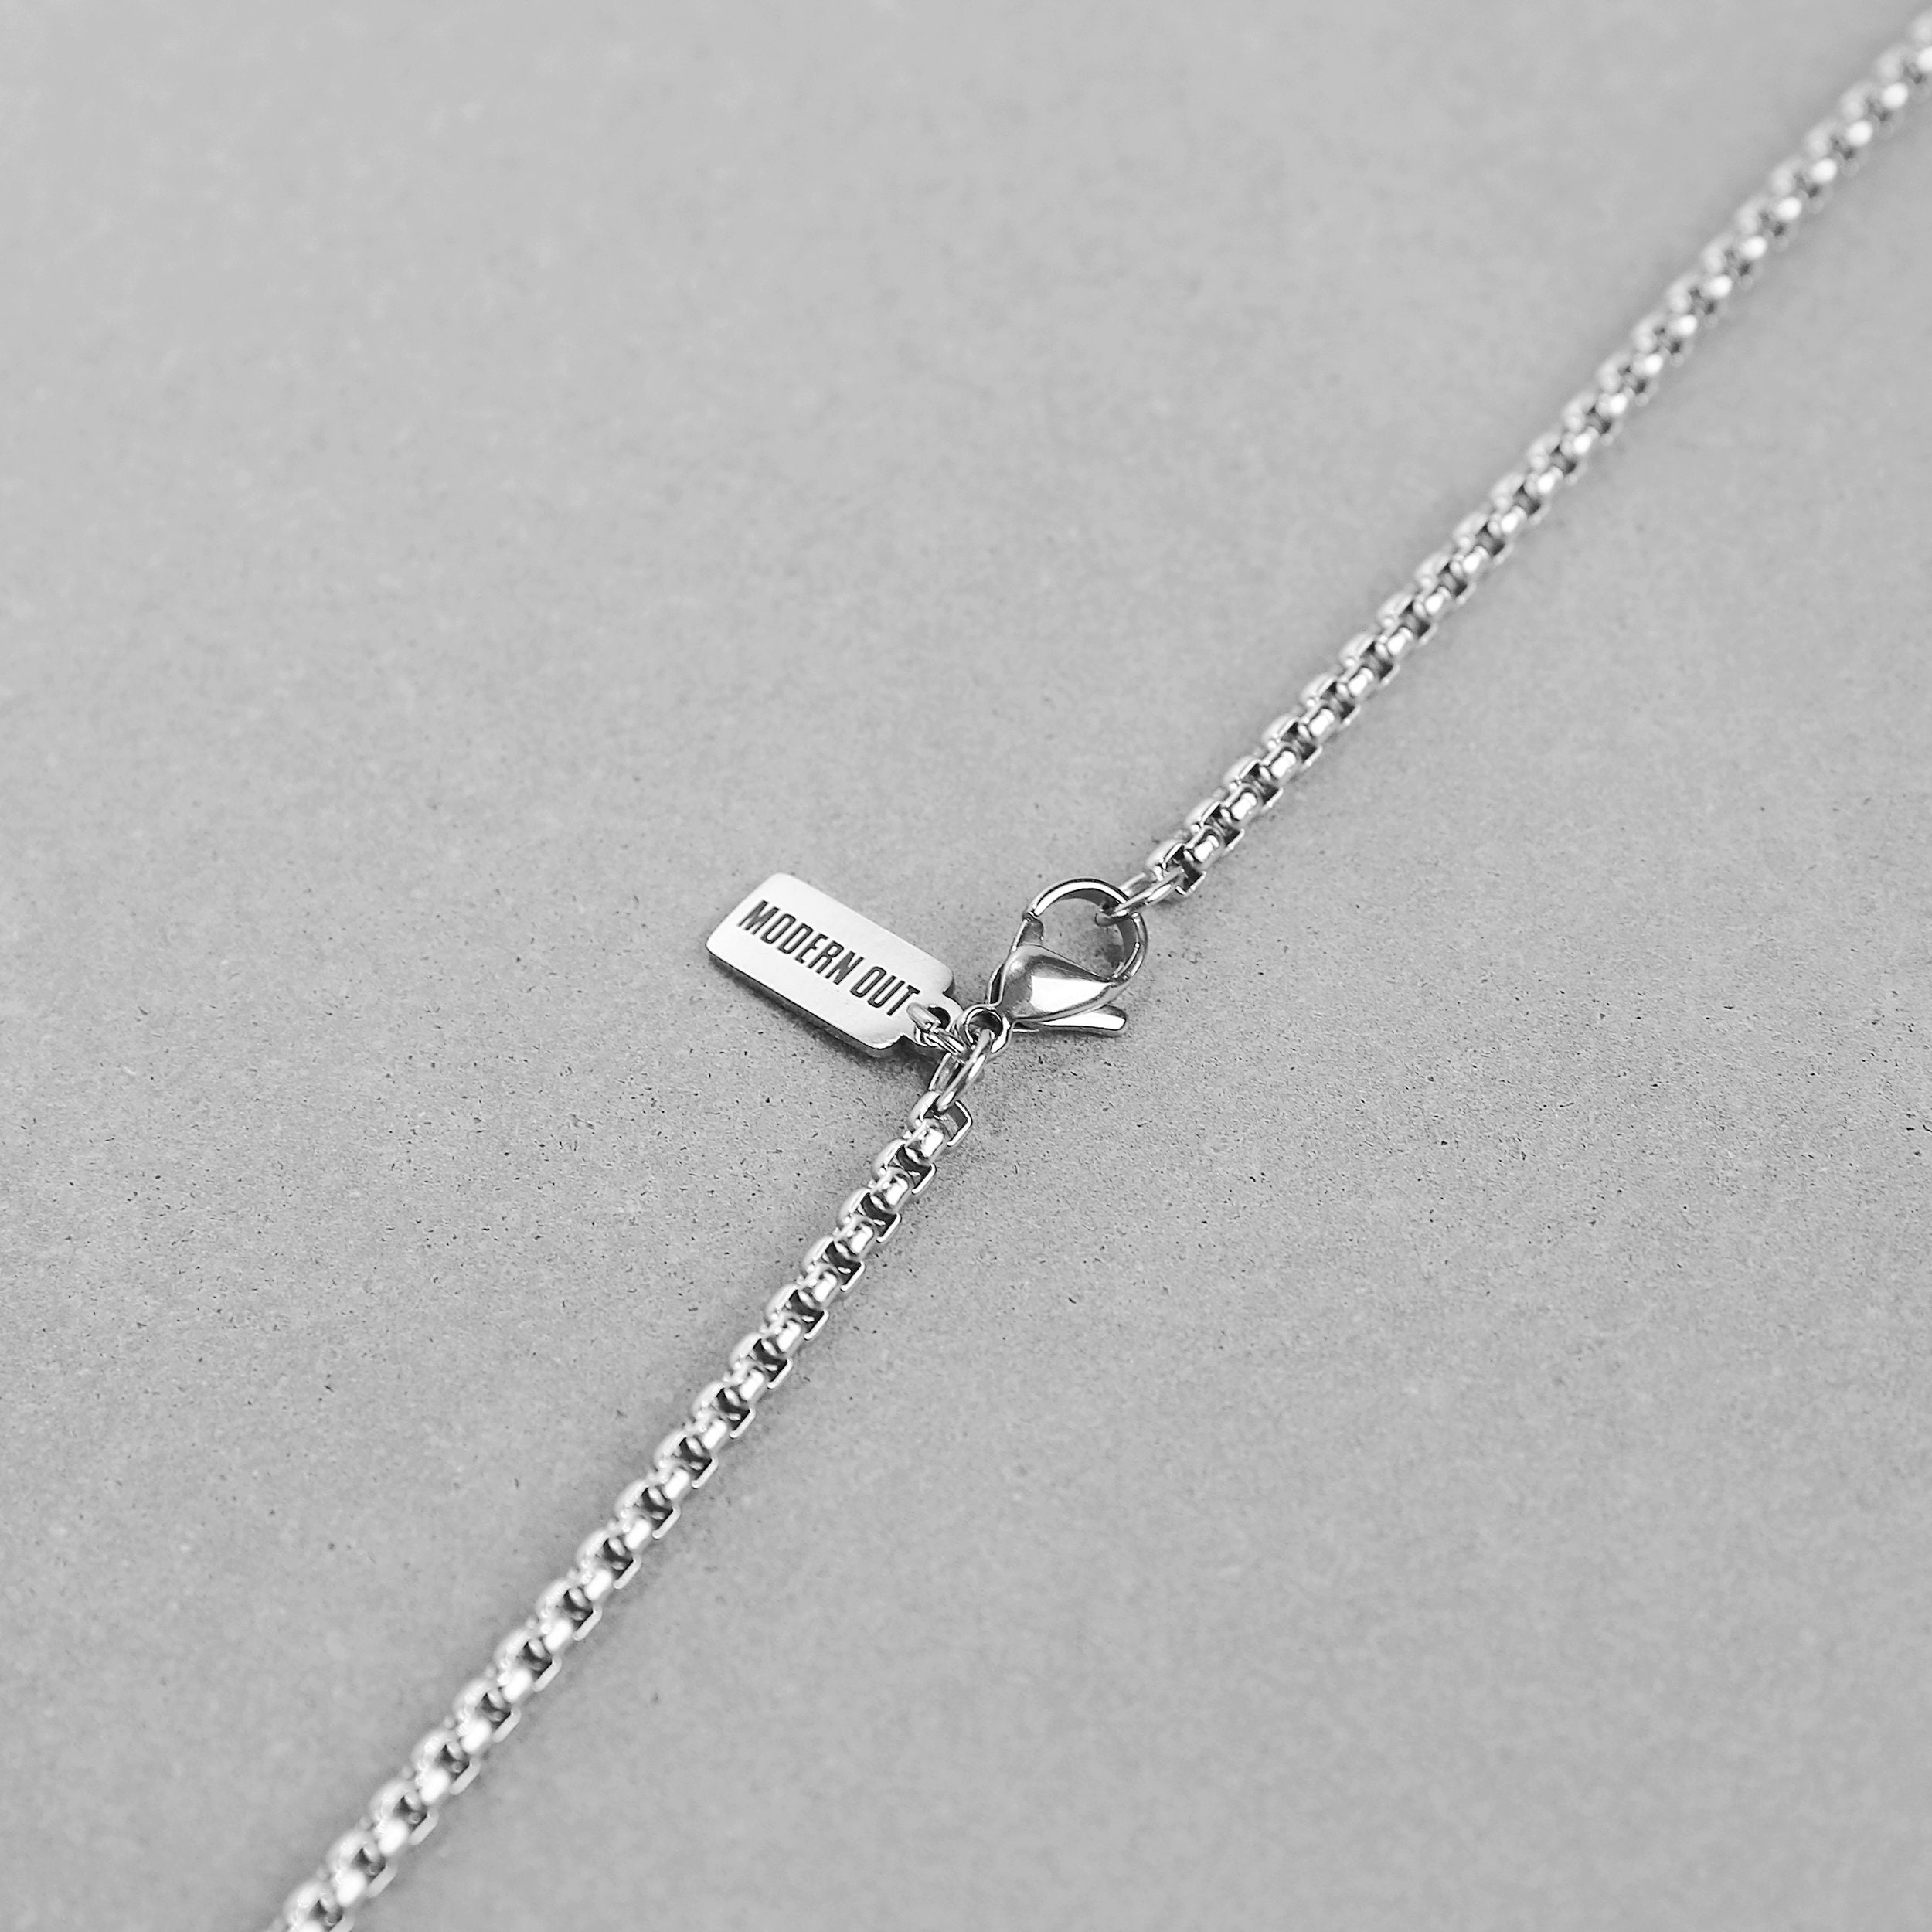 Men's Necklace - Burnish Silver Box Chain Necklace 3.5mm - Masculine Chain - Stainless Chain - Waterproof Jewelry - Necklace by Modern Out